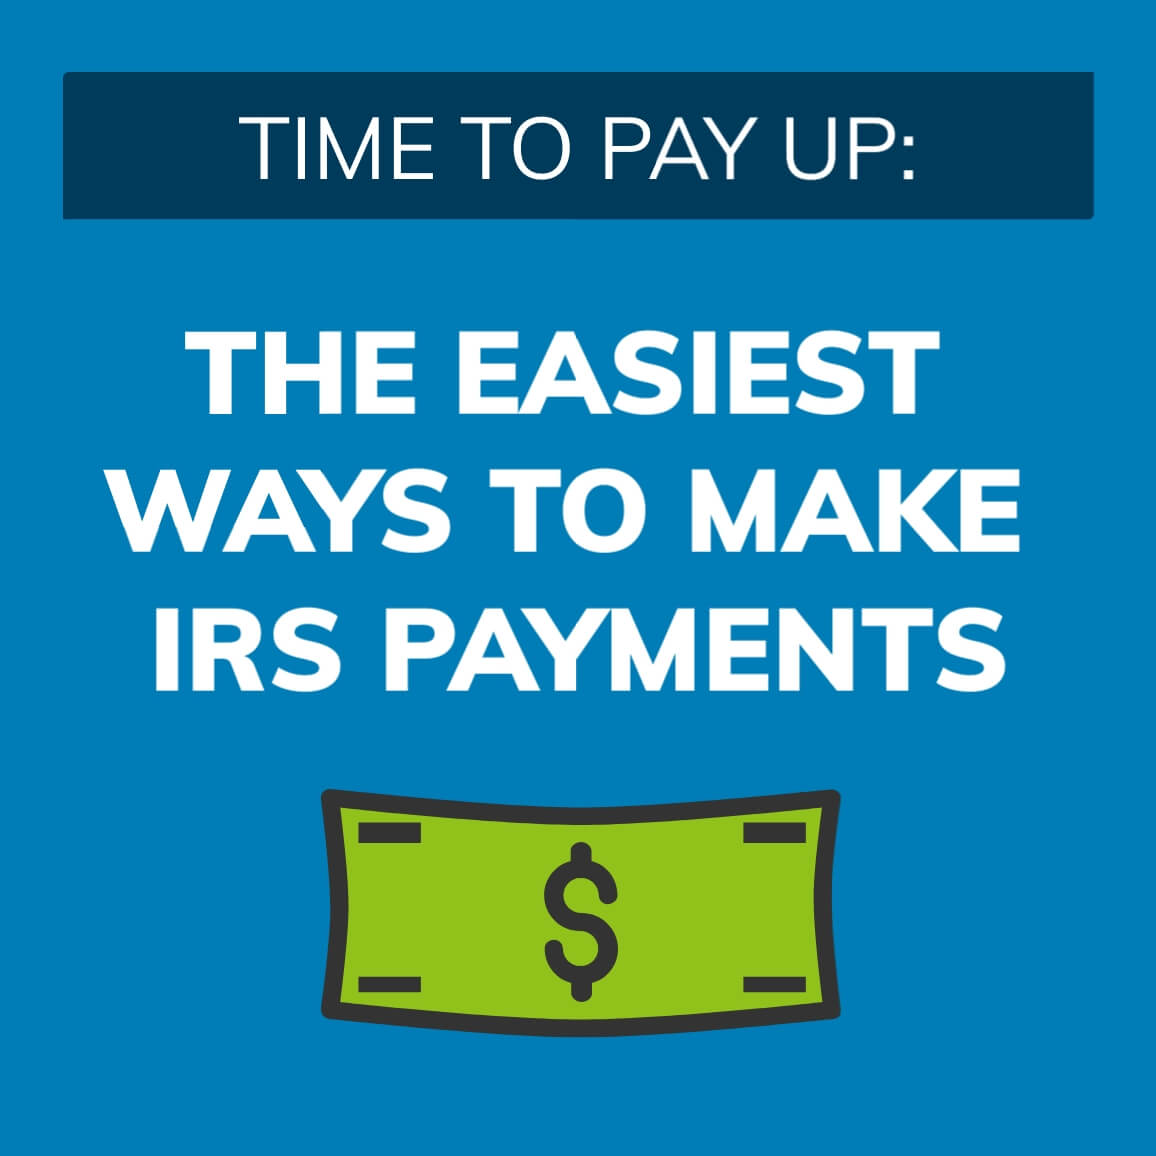 Four-Ways-to-Make-IRS-Payments pdf download